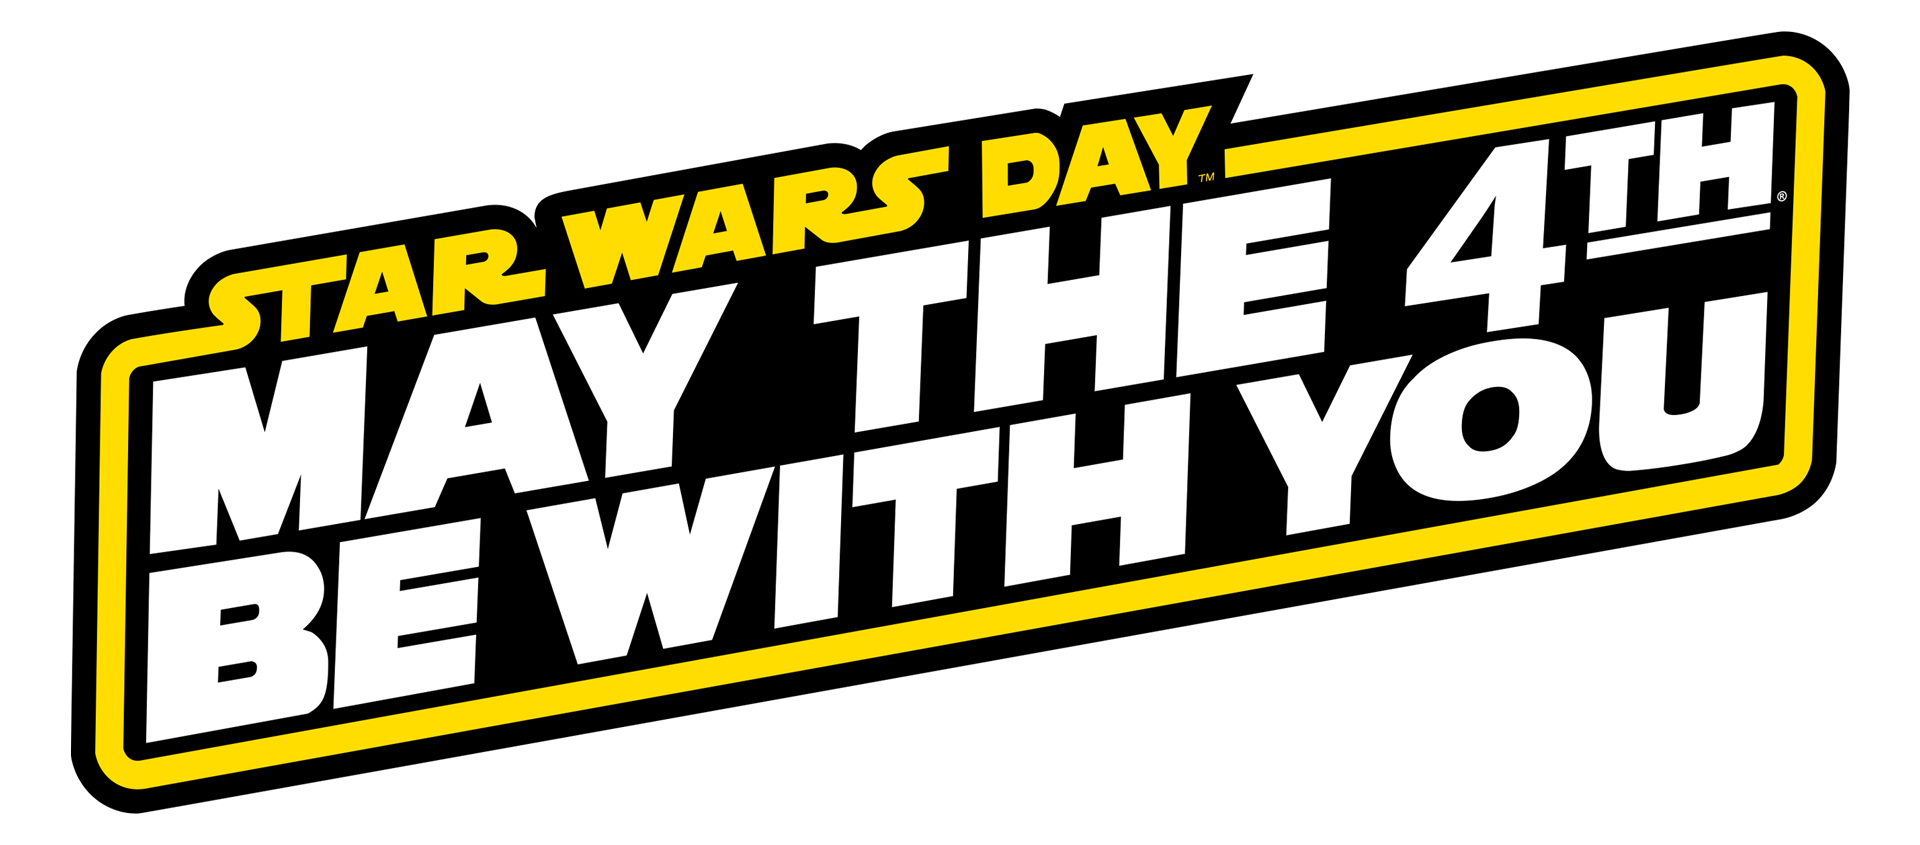 May the 4th Be With You! - I DO Y'ALL